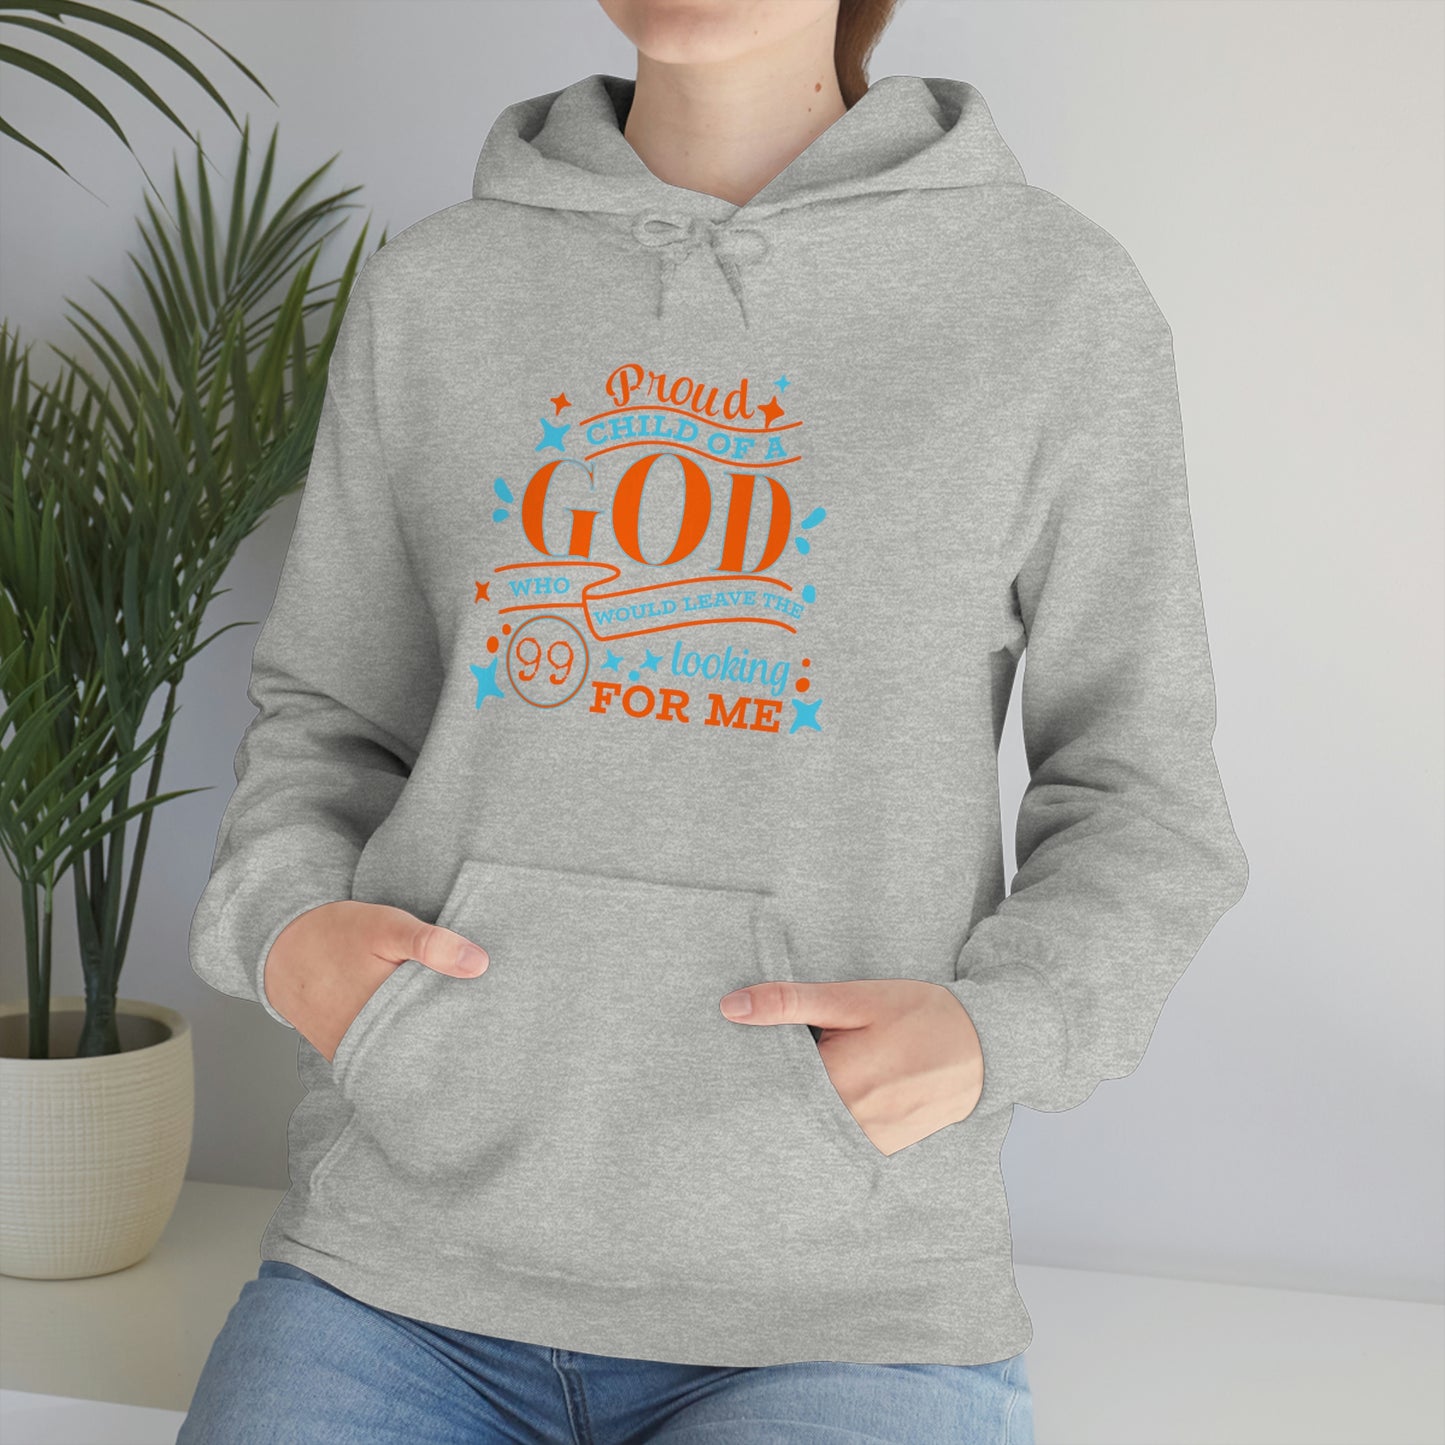 Proud Child Of A God Who Would Leave The 99 Looking For Me Unisex Pull On Hooded sweatshirt